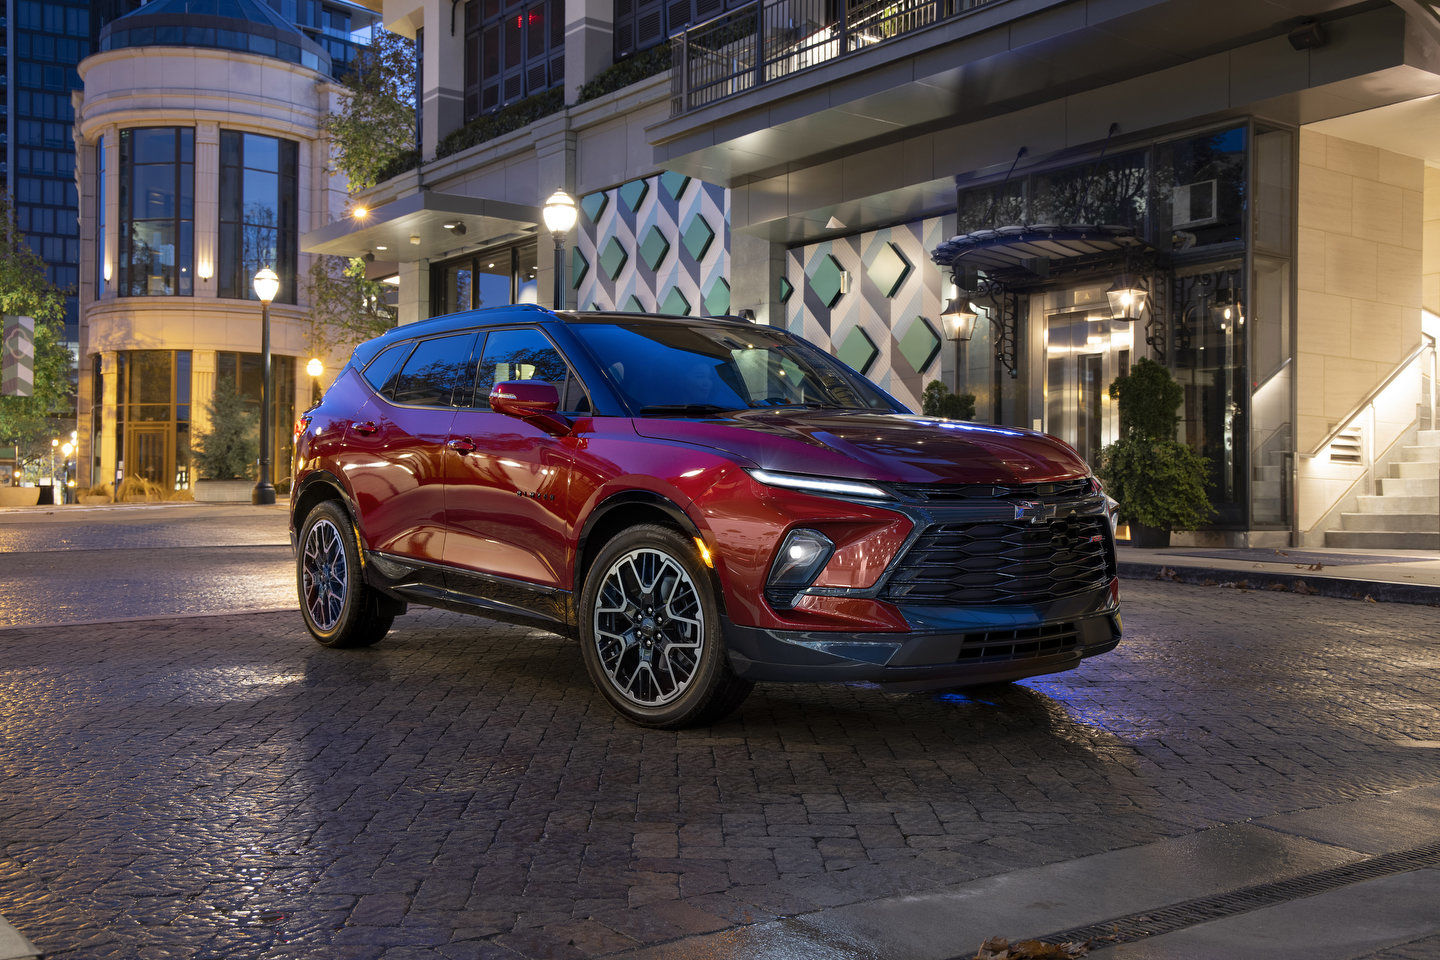 2023 Chevrolet Blazer: A Fresh and Feature-Packed Midsize SUV